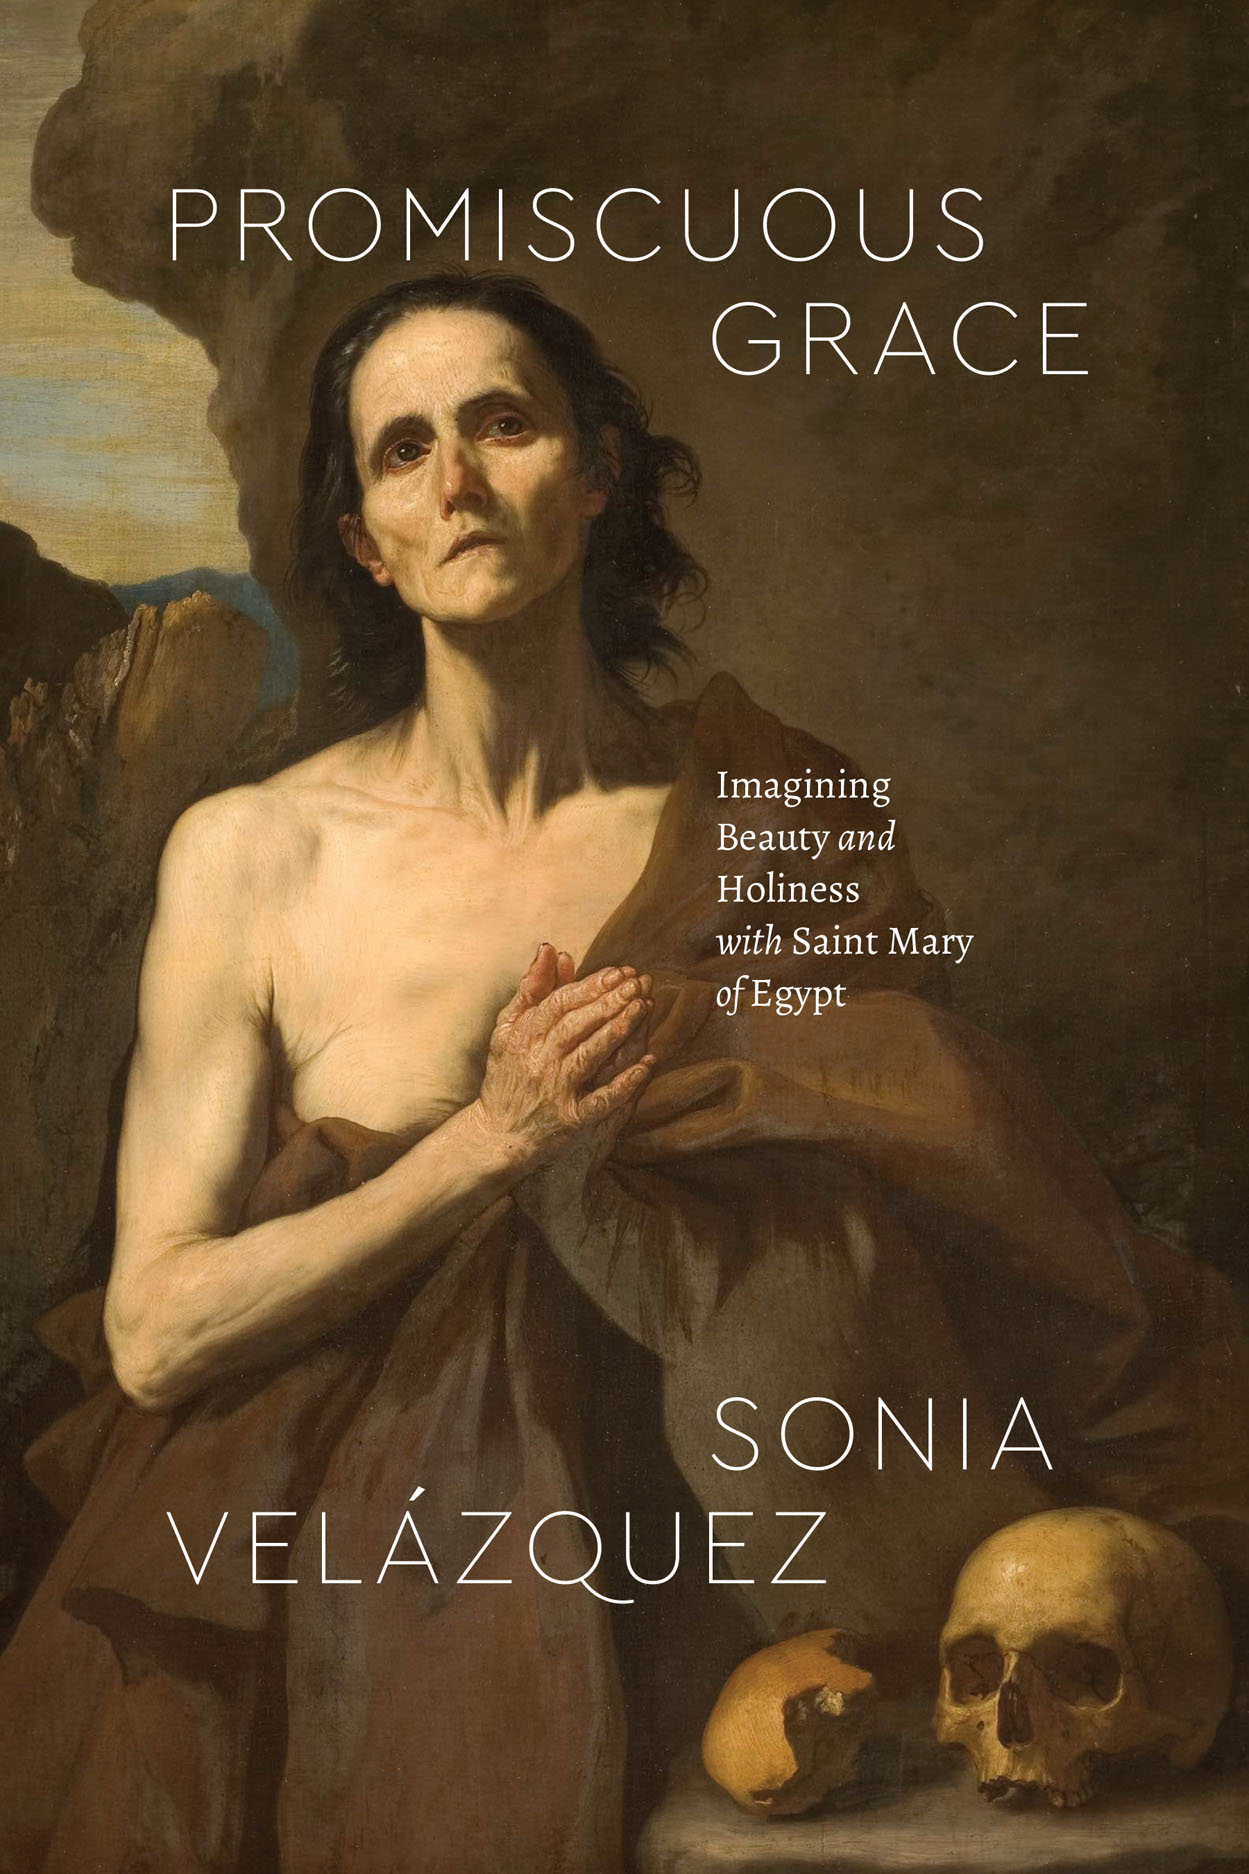 Promiscuous Grace: Imagining Beauty and Holiness with Saint Mary